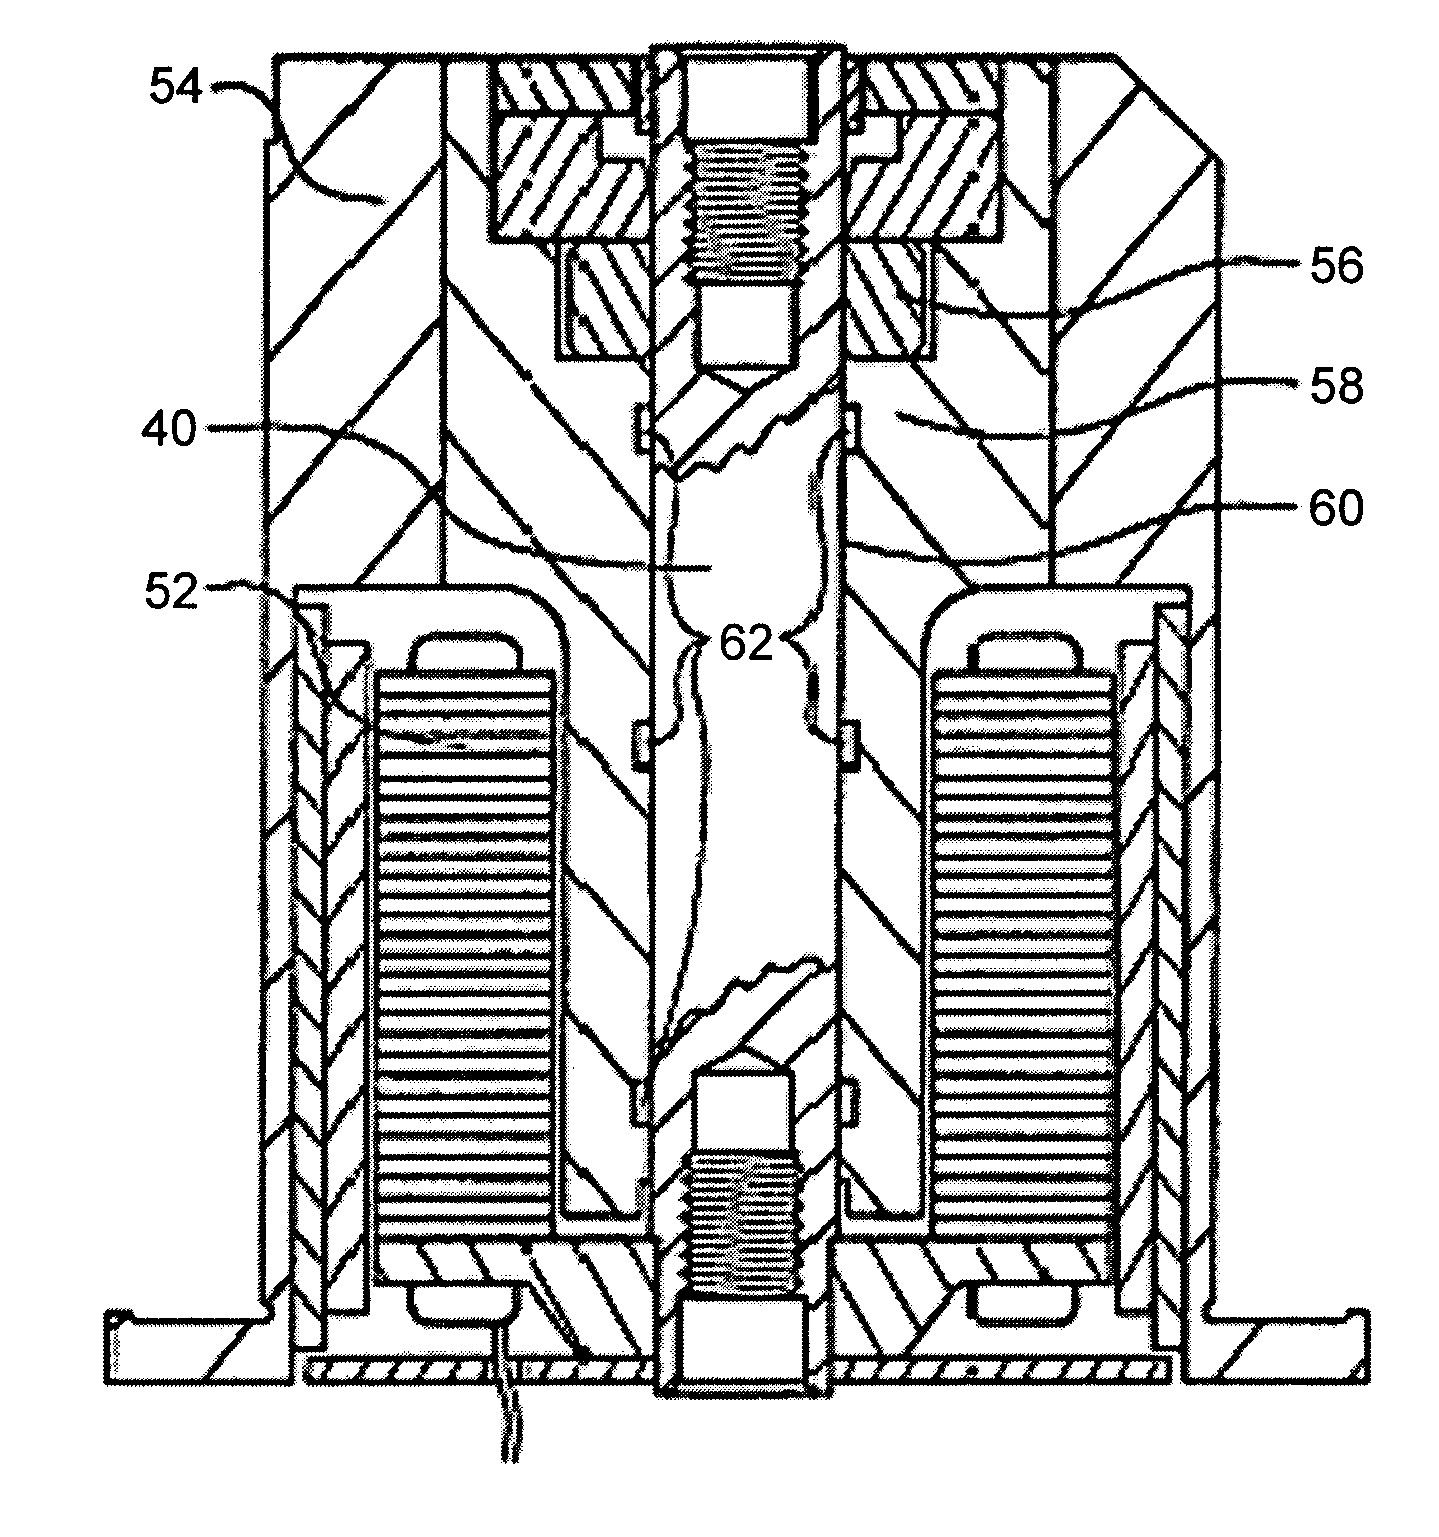 Disk drive system with hydrodynamic bearing lubricant having charge-control additive comprising dioctyldiphenylamine and/or oligomer thereof